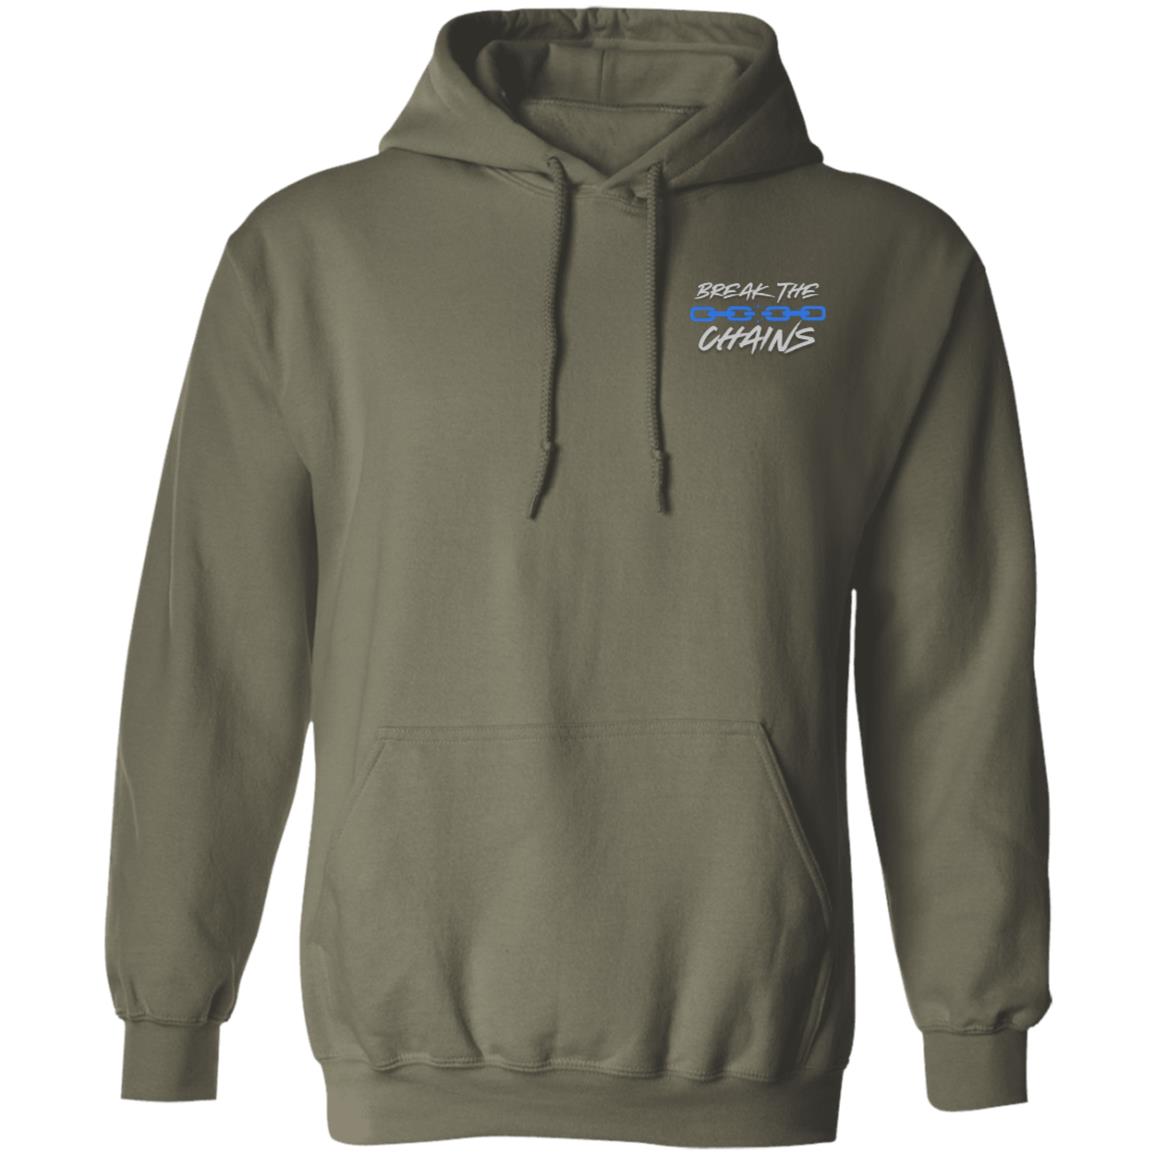 Resilience Pullover Hoodie - HopeLinks QrClothes